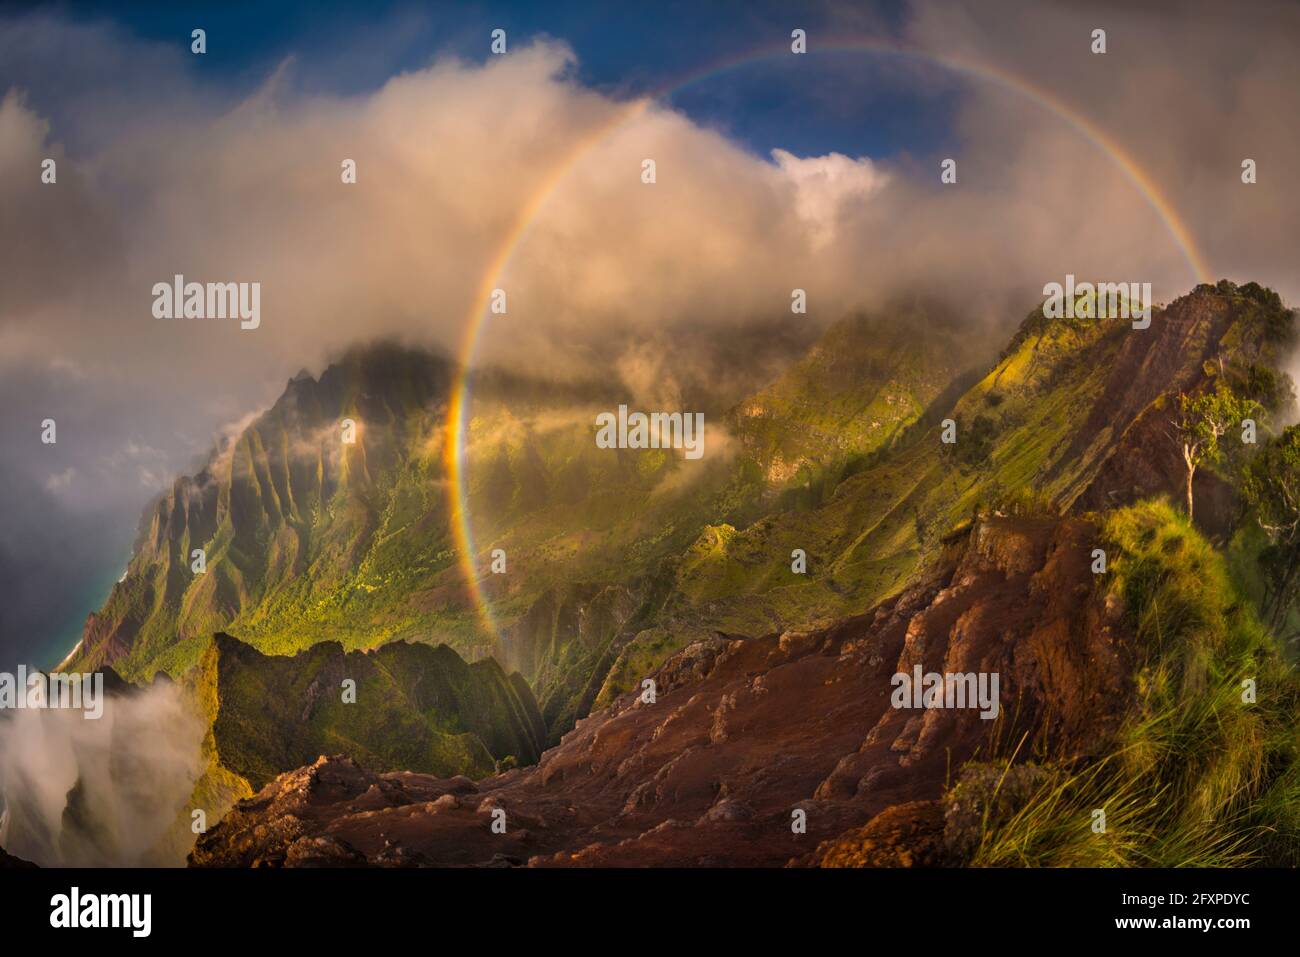 A 180 degree rainbow formed by the clouds over the Kalalau Valley in the evening, Napali Coast State Wilderness Park, Kauai, Hawaii, USA, Pacific Stock Photo